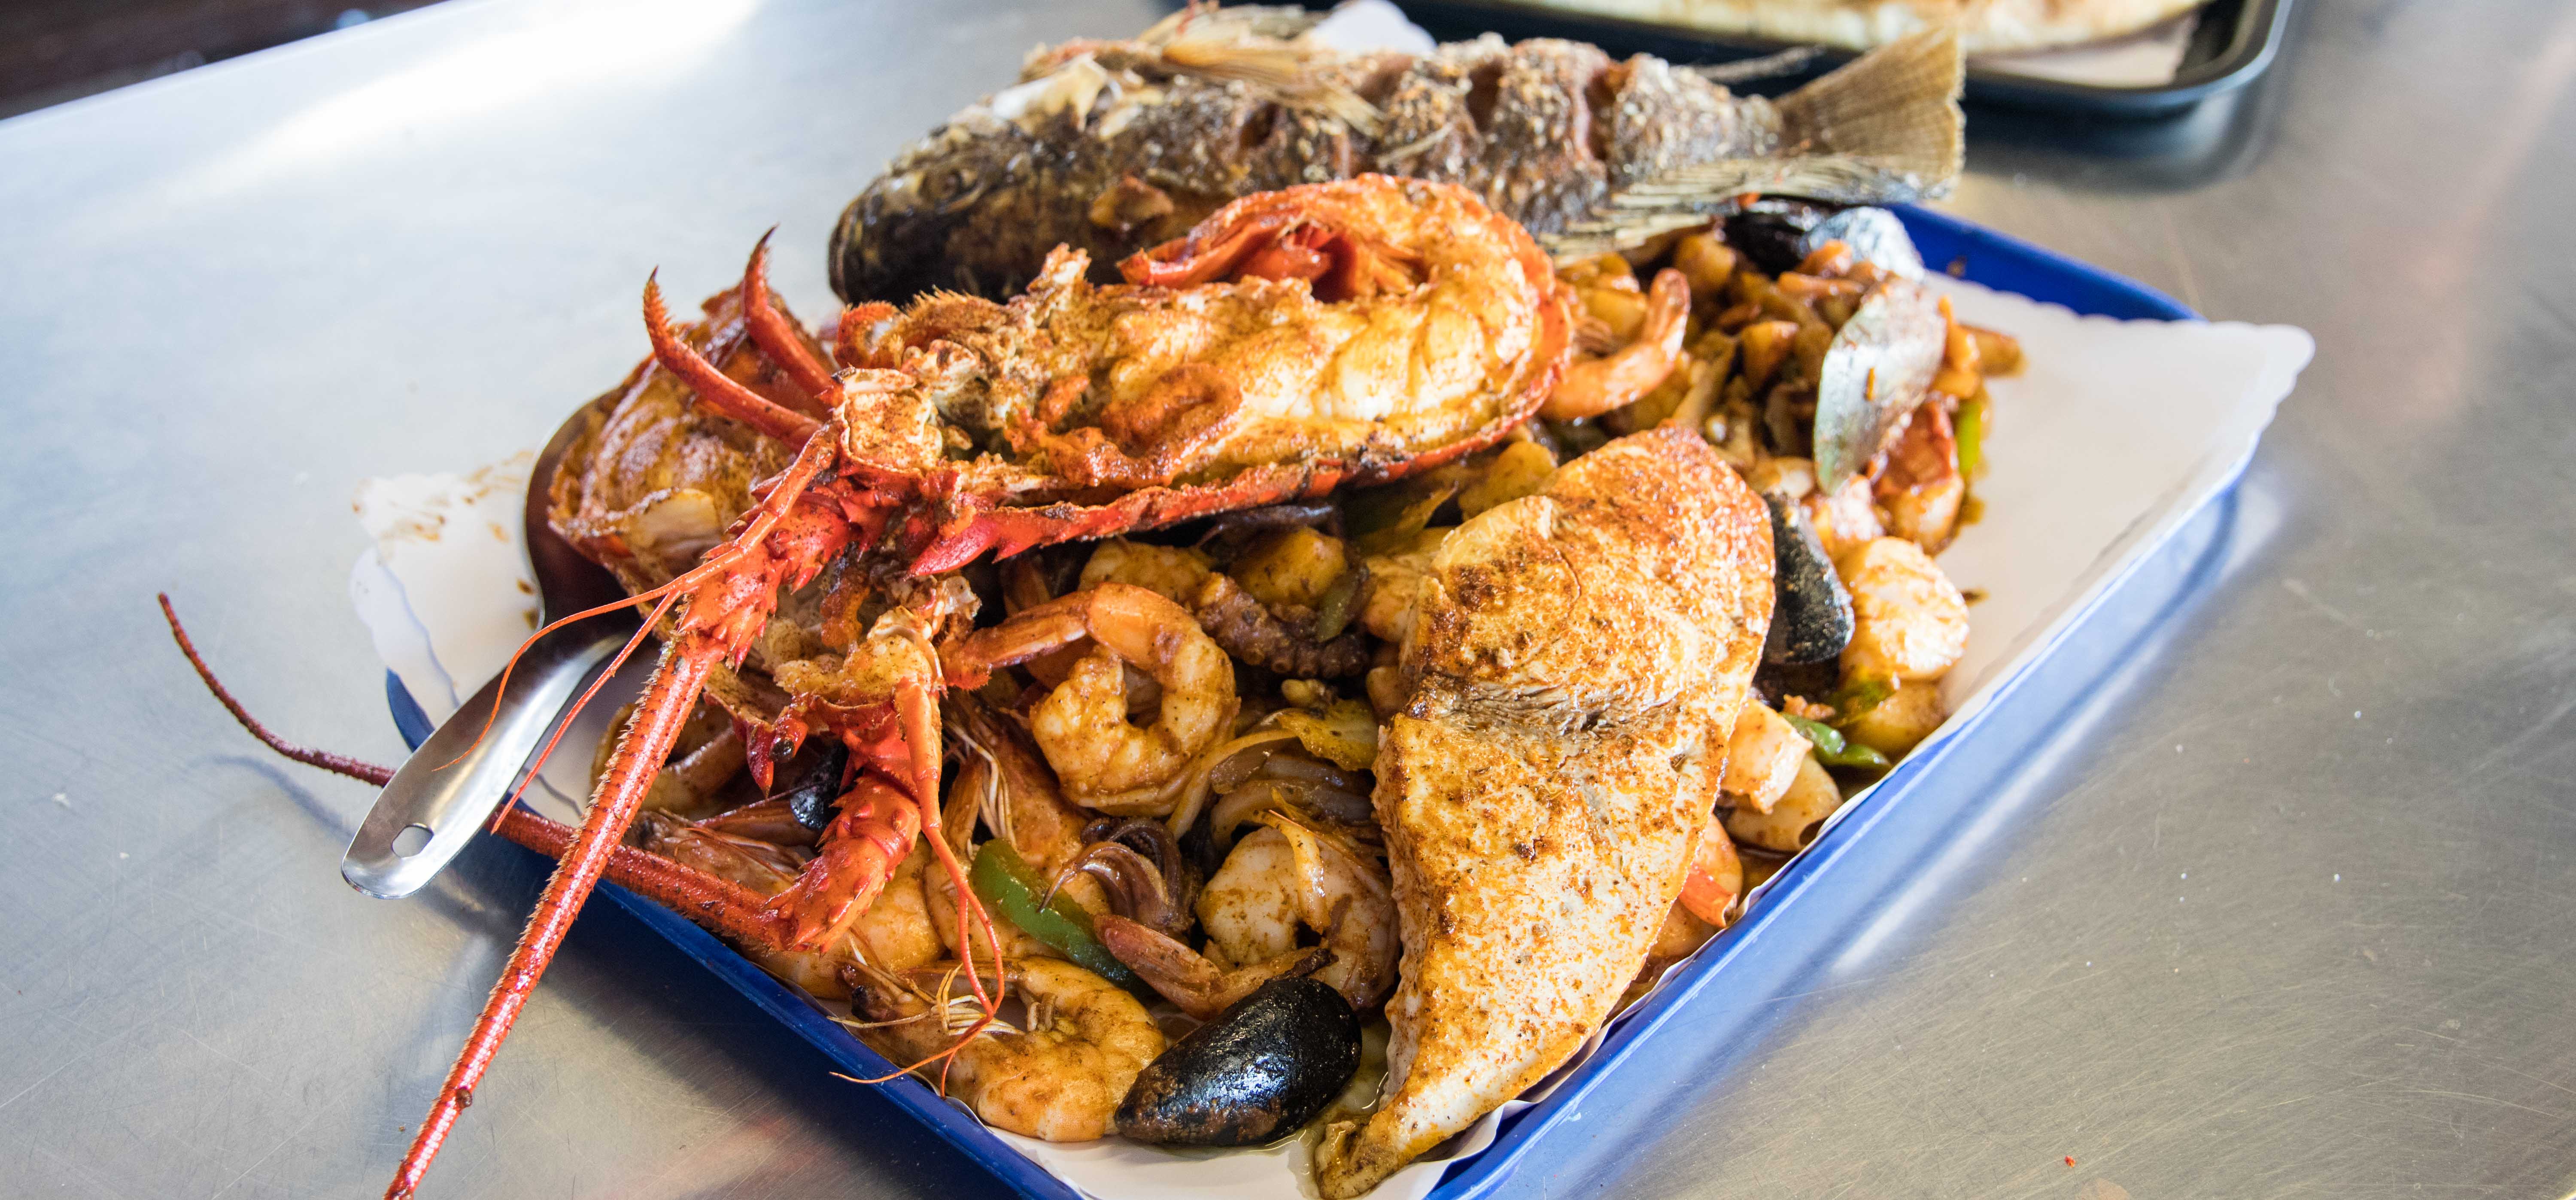 Feast Your Eyes On San Pedro Fish Market's World-Famous Seafood ...